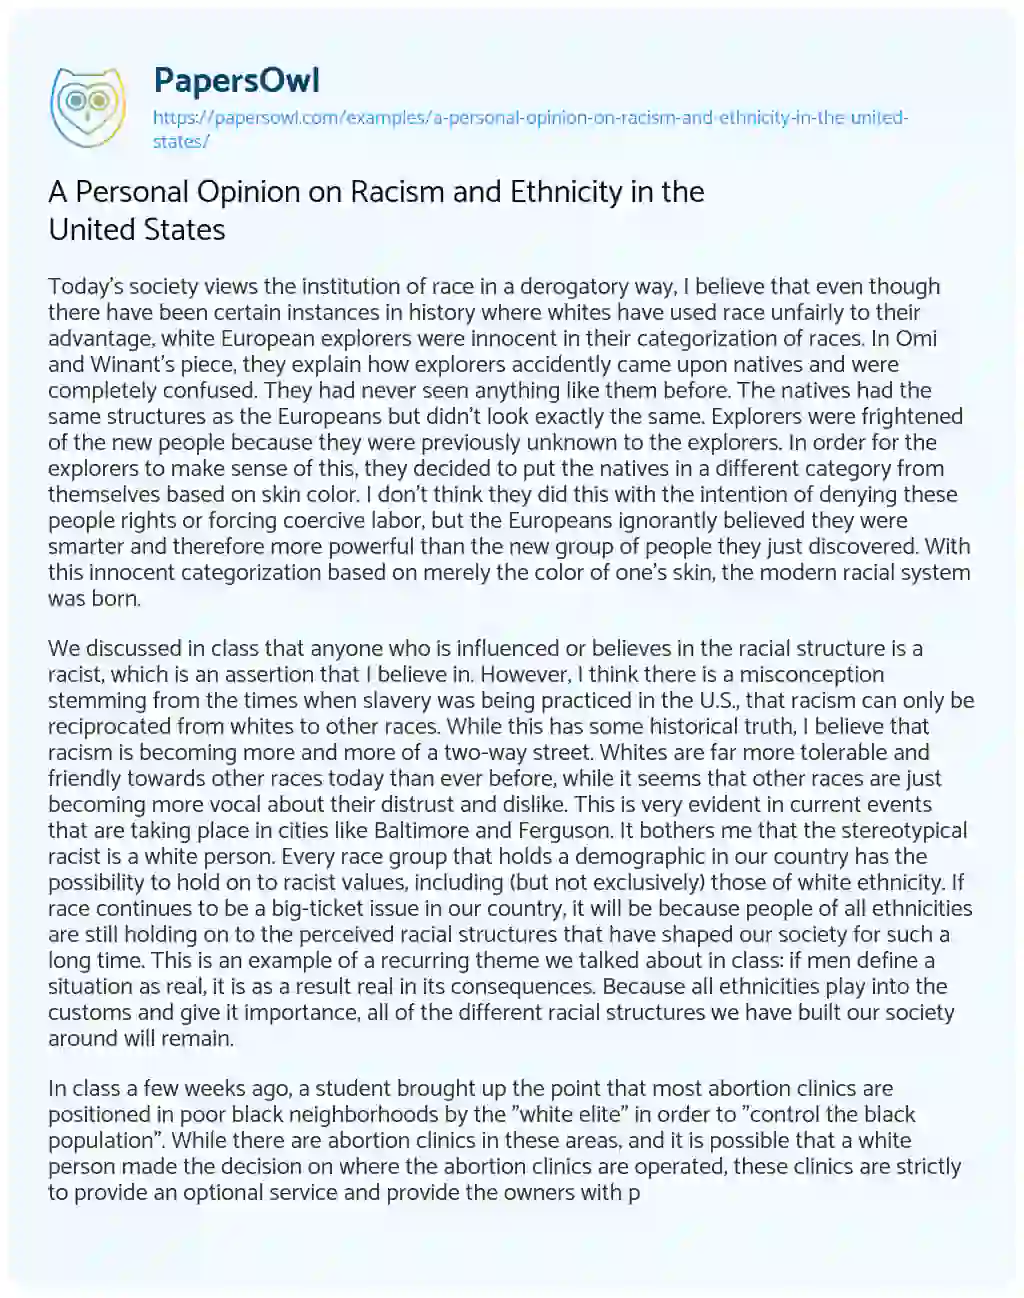 Essay on A Personal Opinion on Racism and Ethnicity in the United States